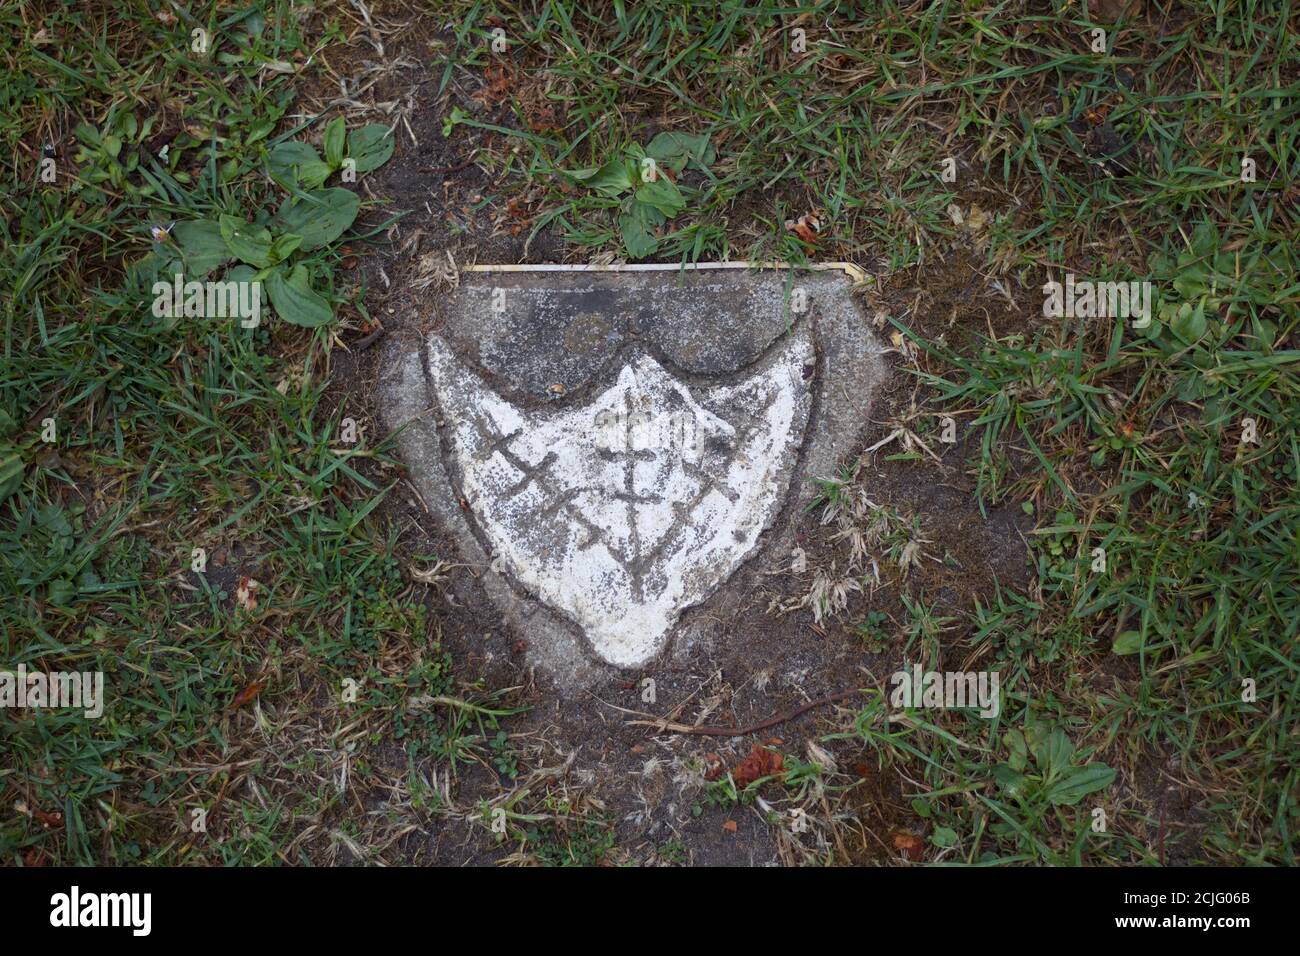 Single emblem of ducks webbed foot on plaque in grass Stock Photo